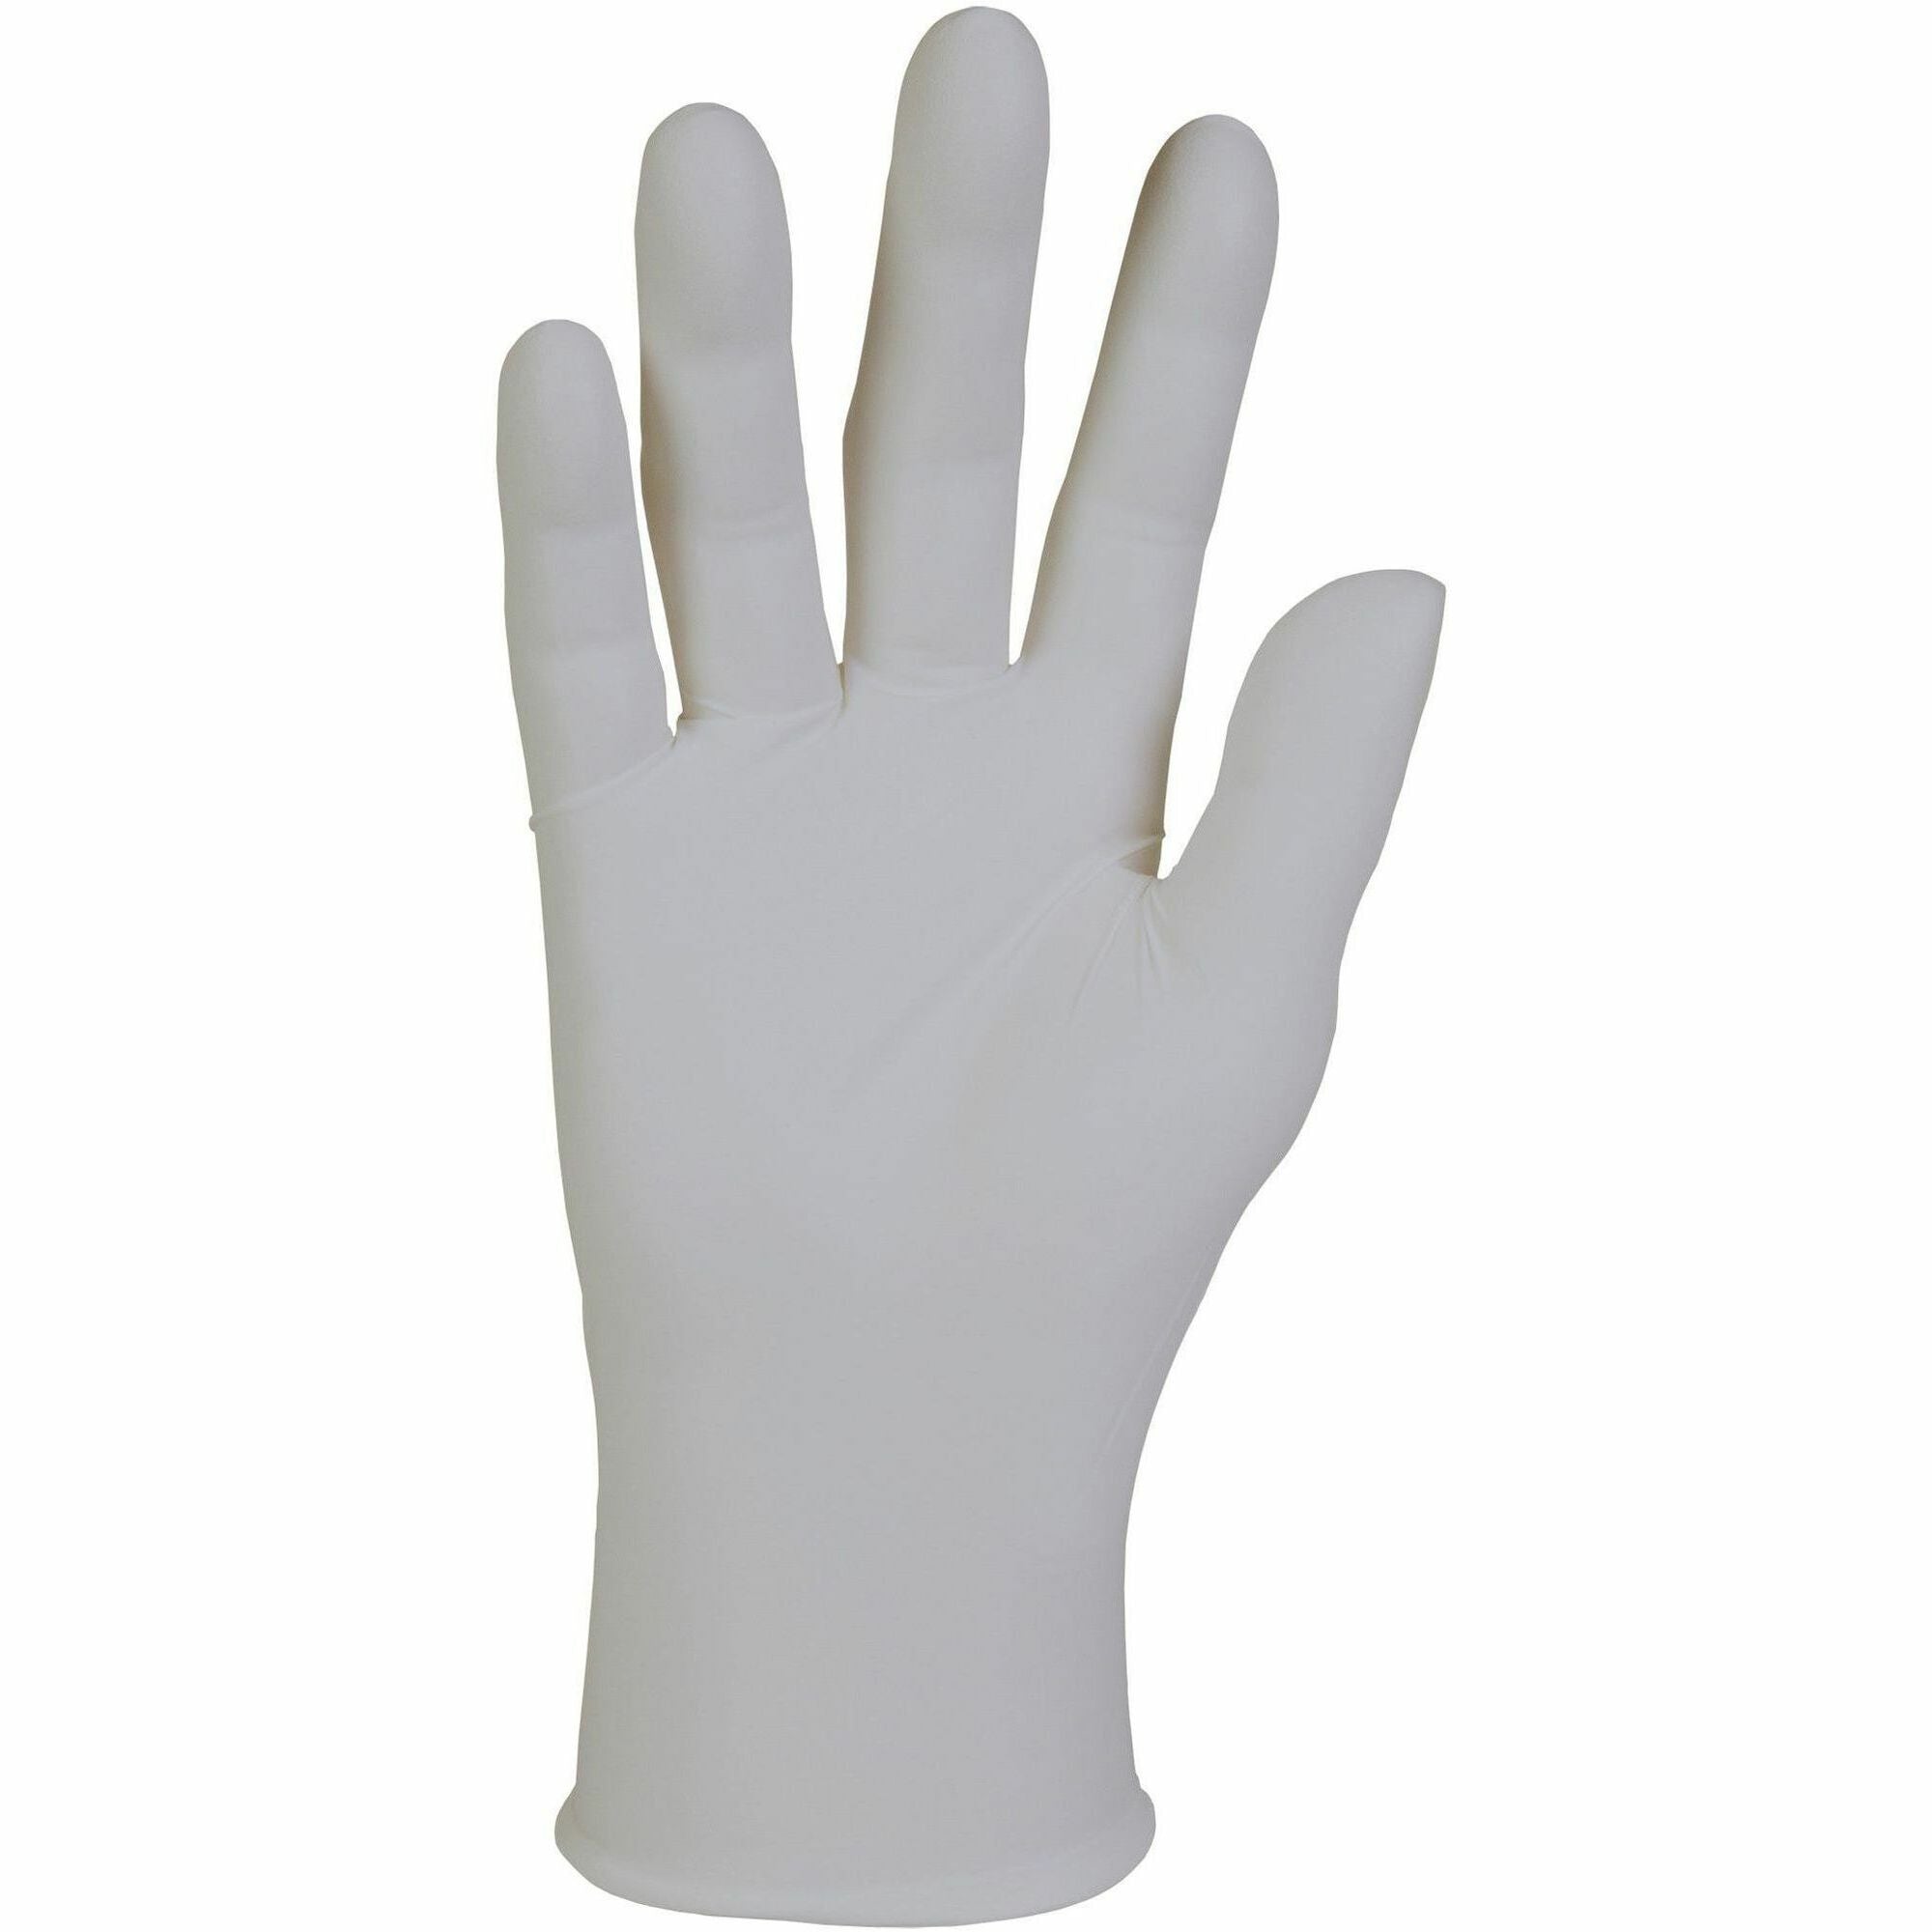 kimberly-clark-professional-sterling-nitrile-exam-gloves_kcc50706ct - 1